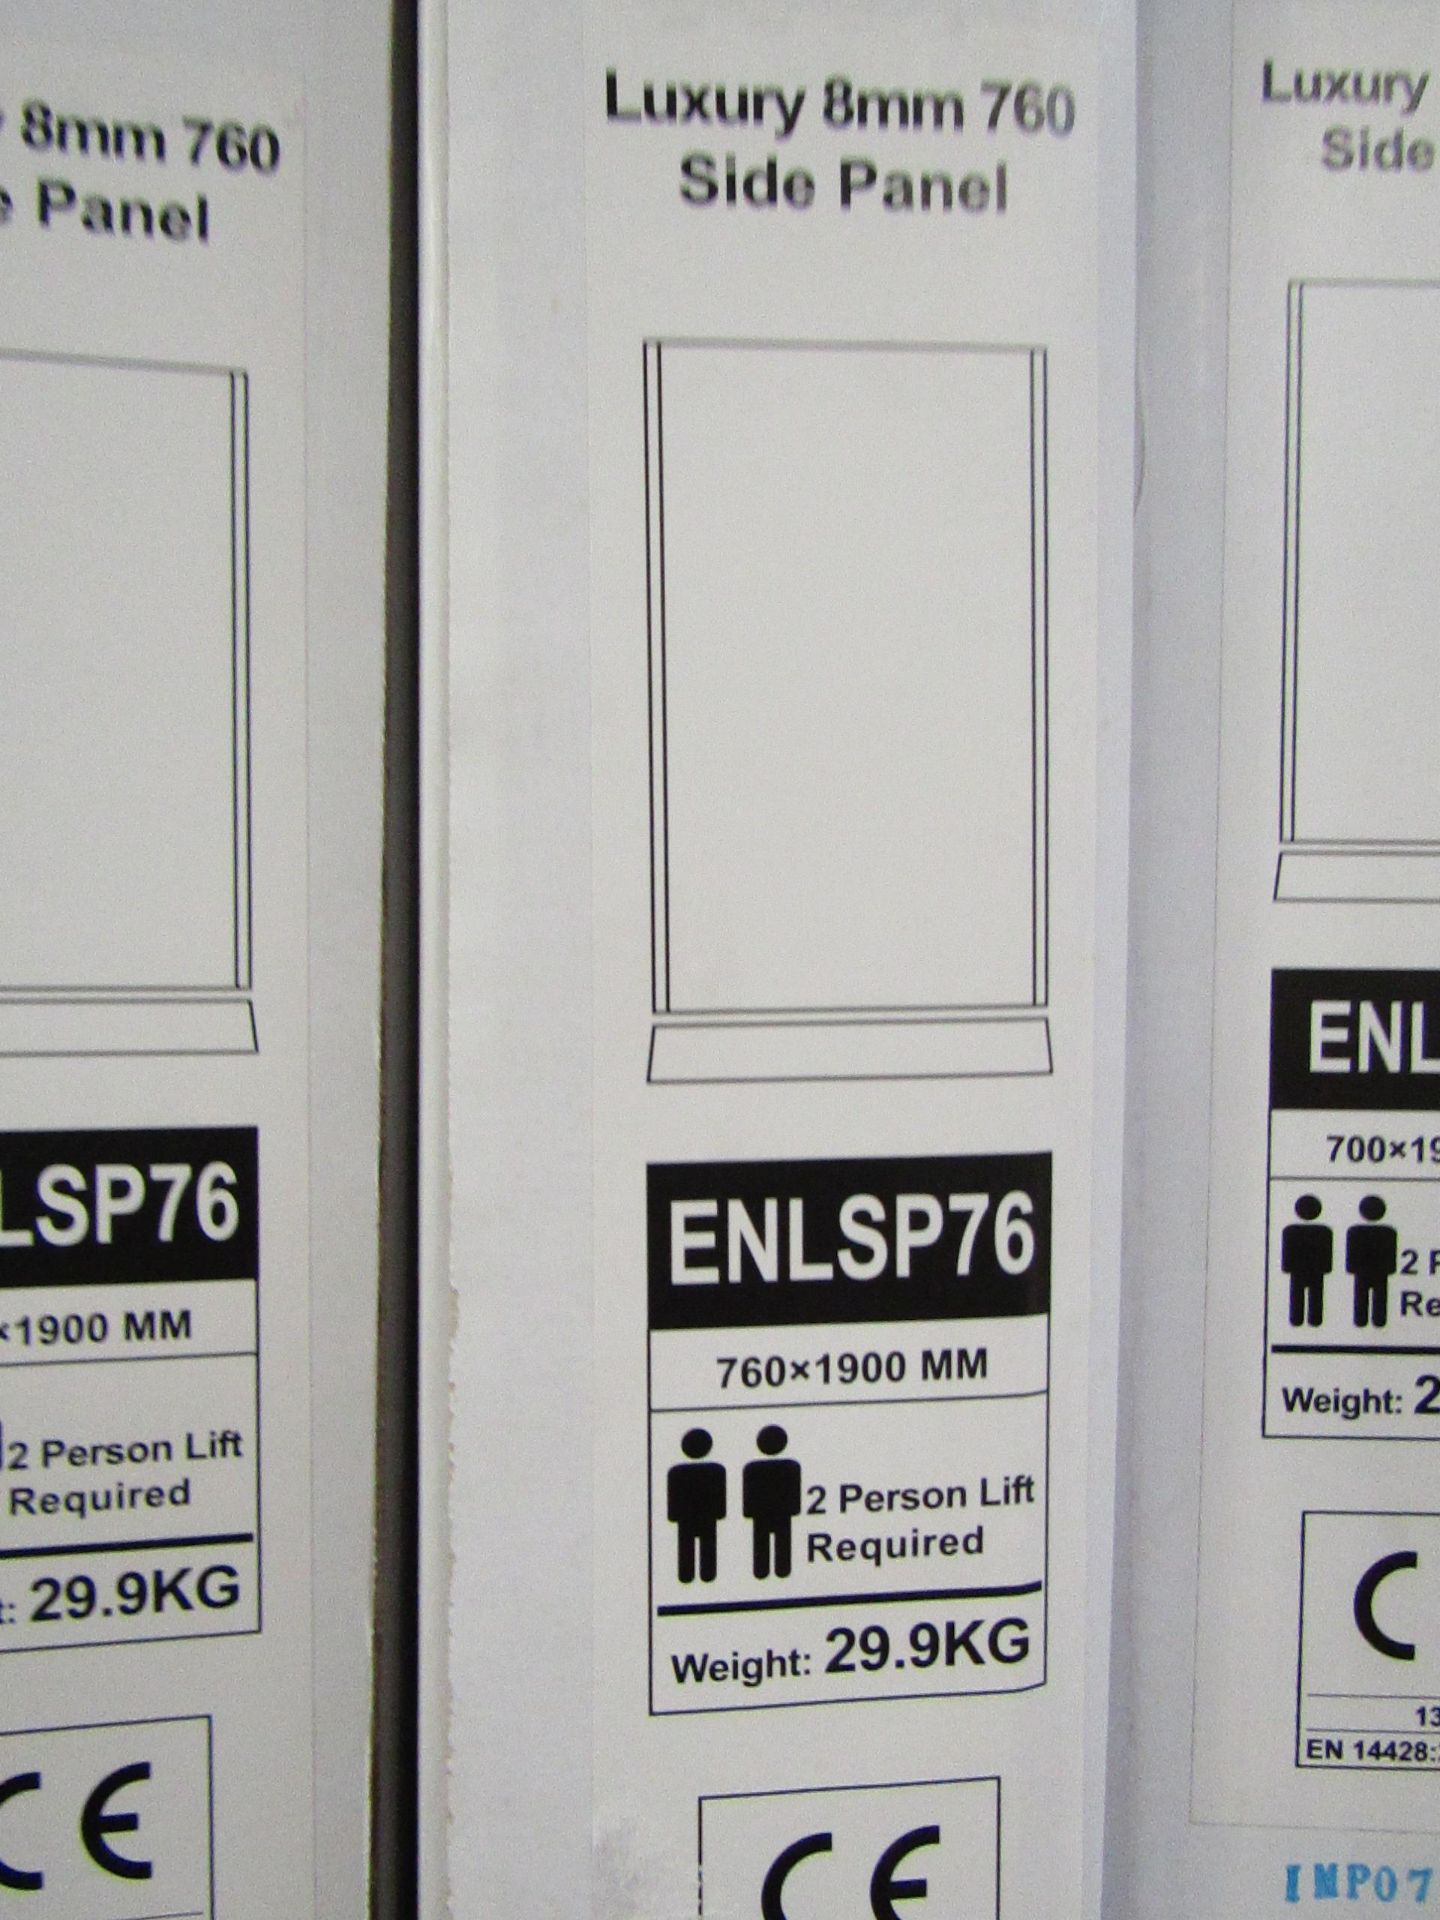 Luxury 8mm 760 side panel ENLSP76, new and boxed. RRP œ143. - Image 2 of 2